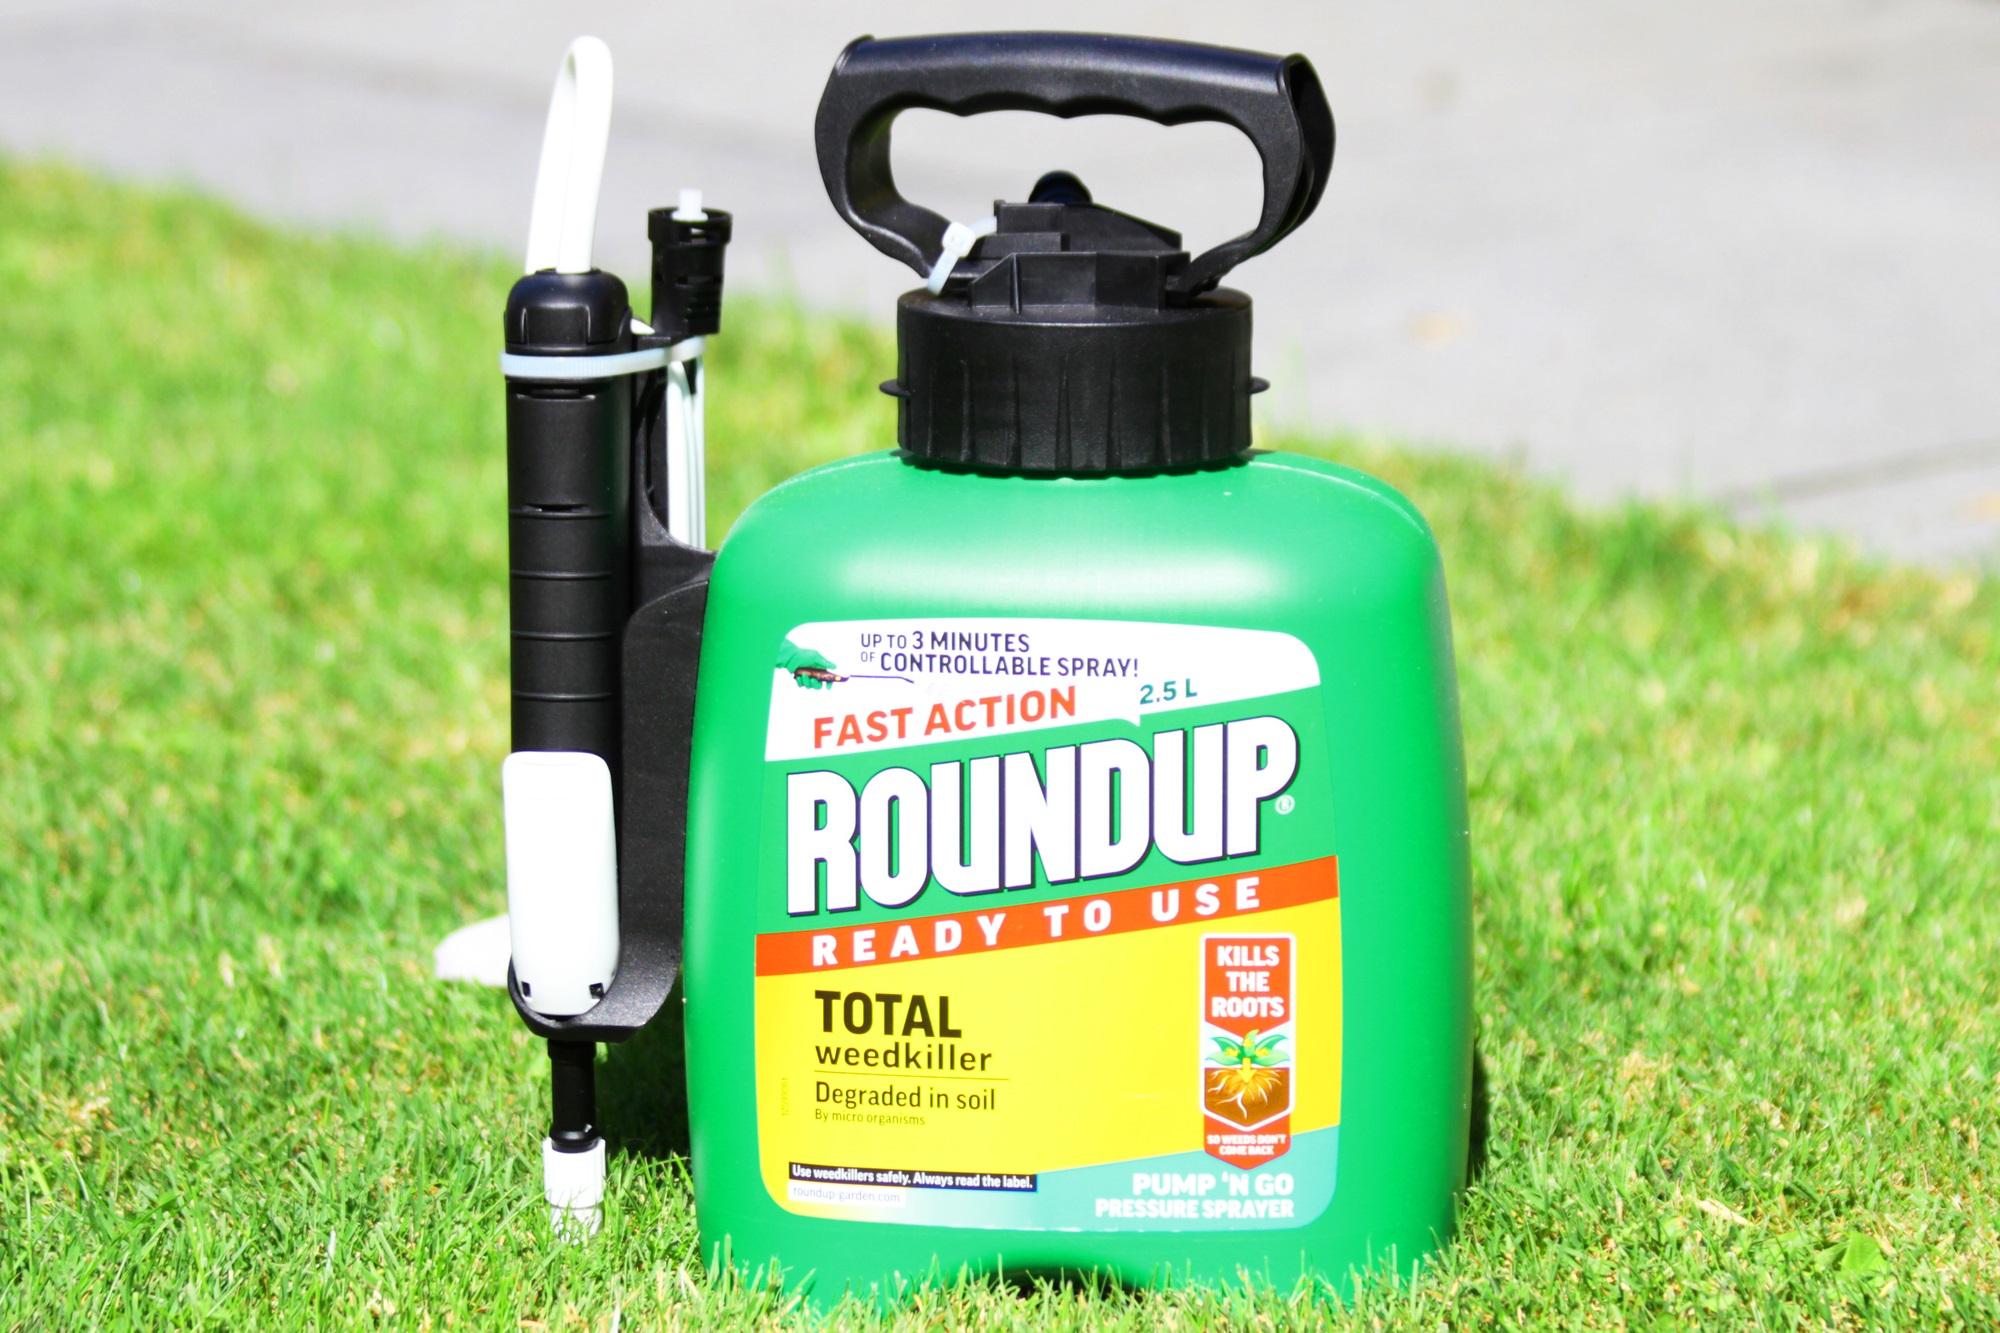 Roundup is finally going to be made without glyphosate in the US